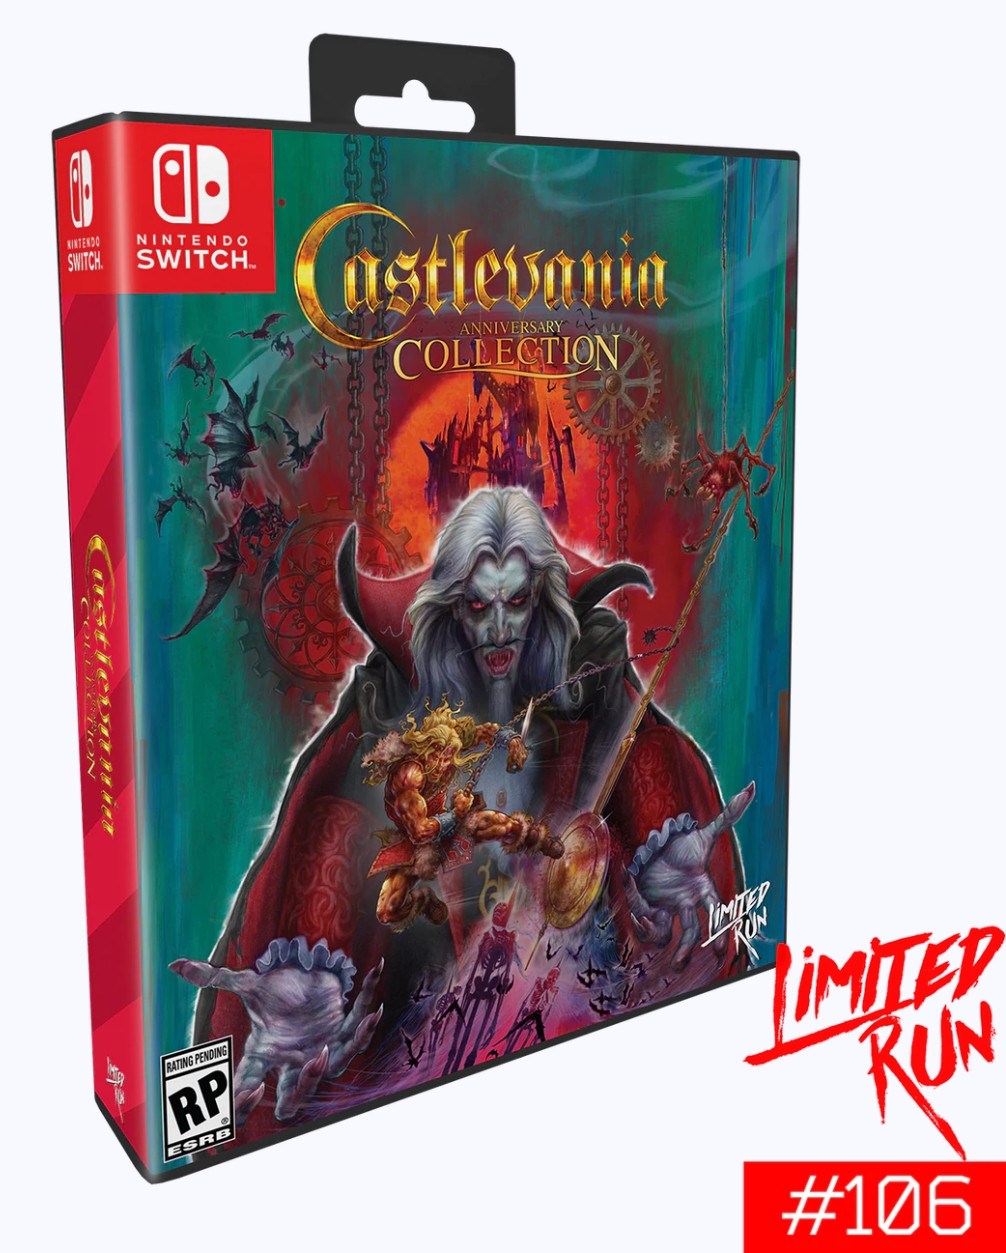 Castlevania - Anniversary Collection Bloodlines Edition (Limited Run Games) - Nintendo Switch